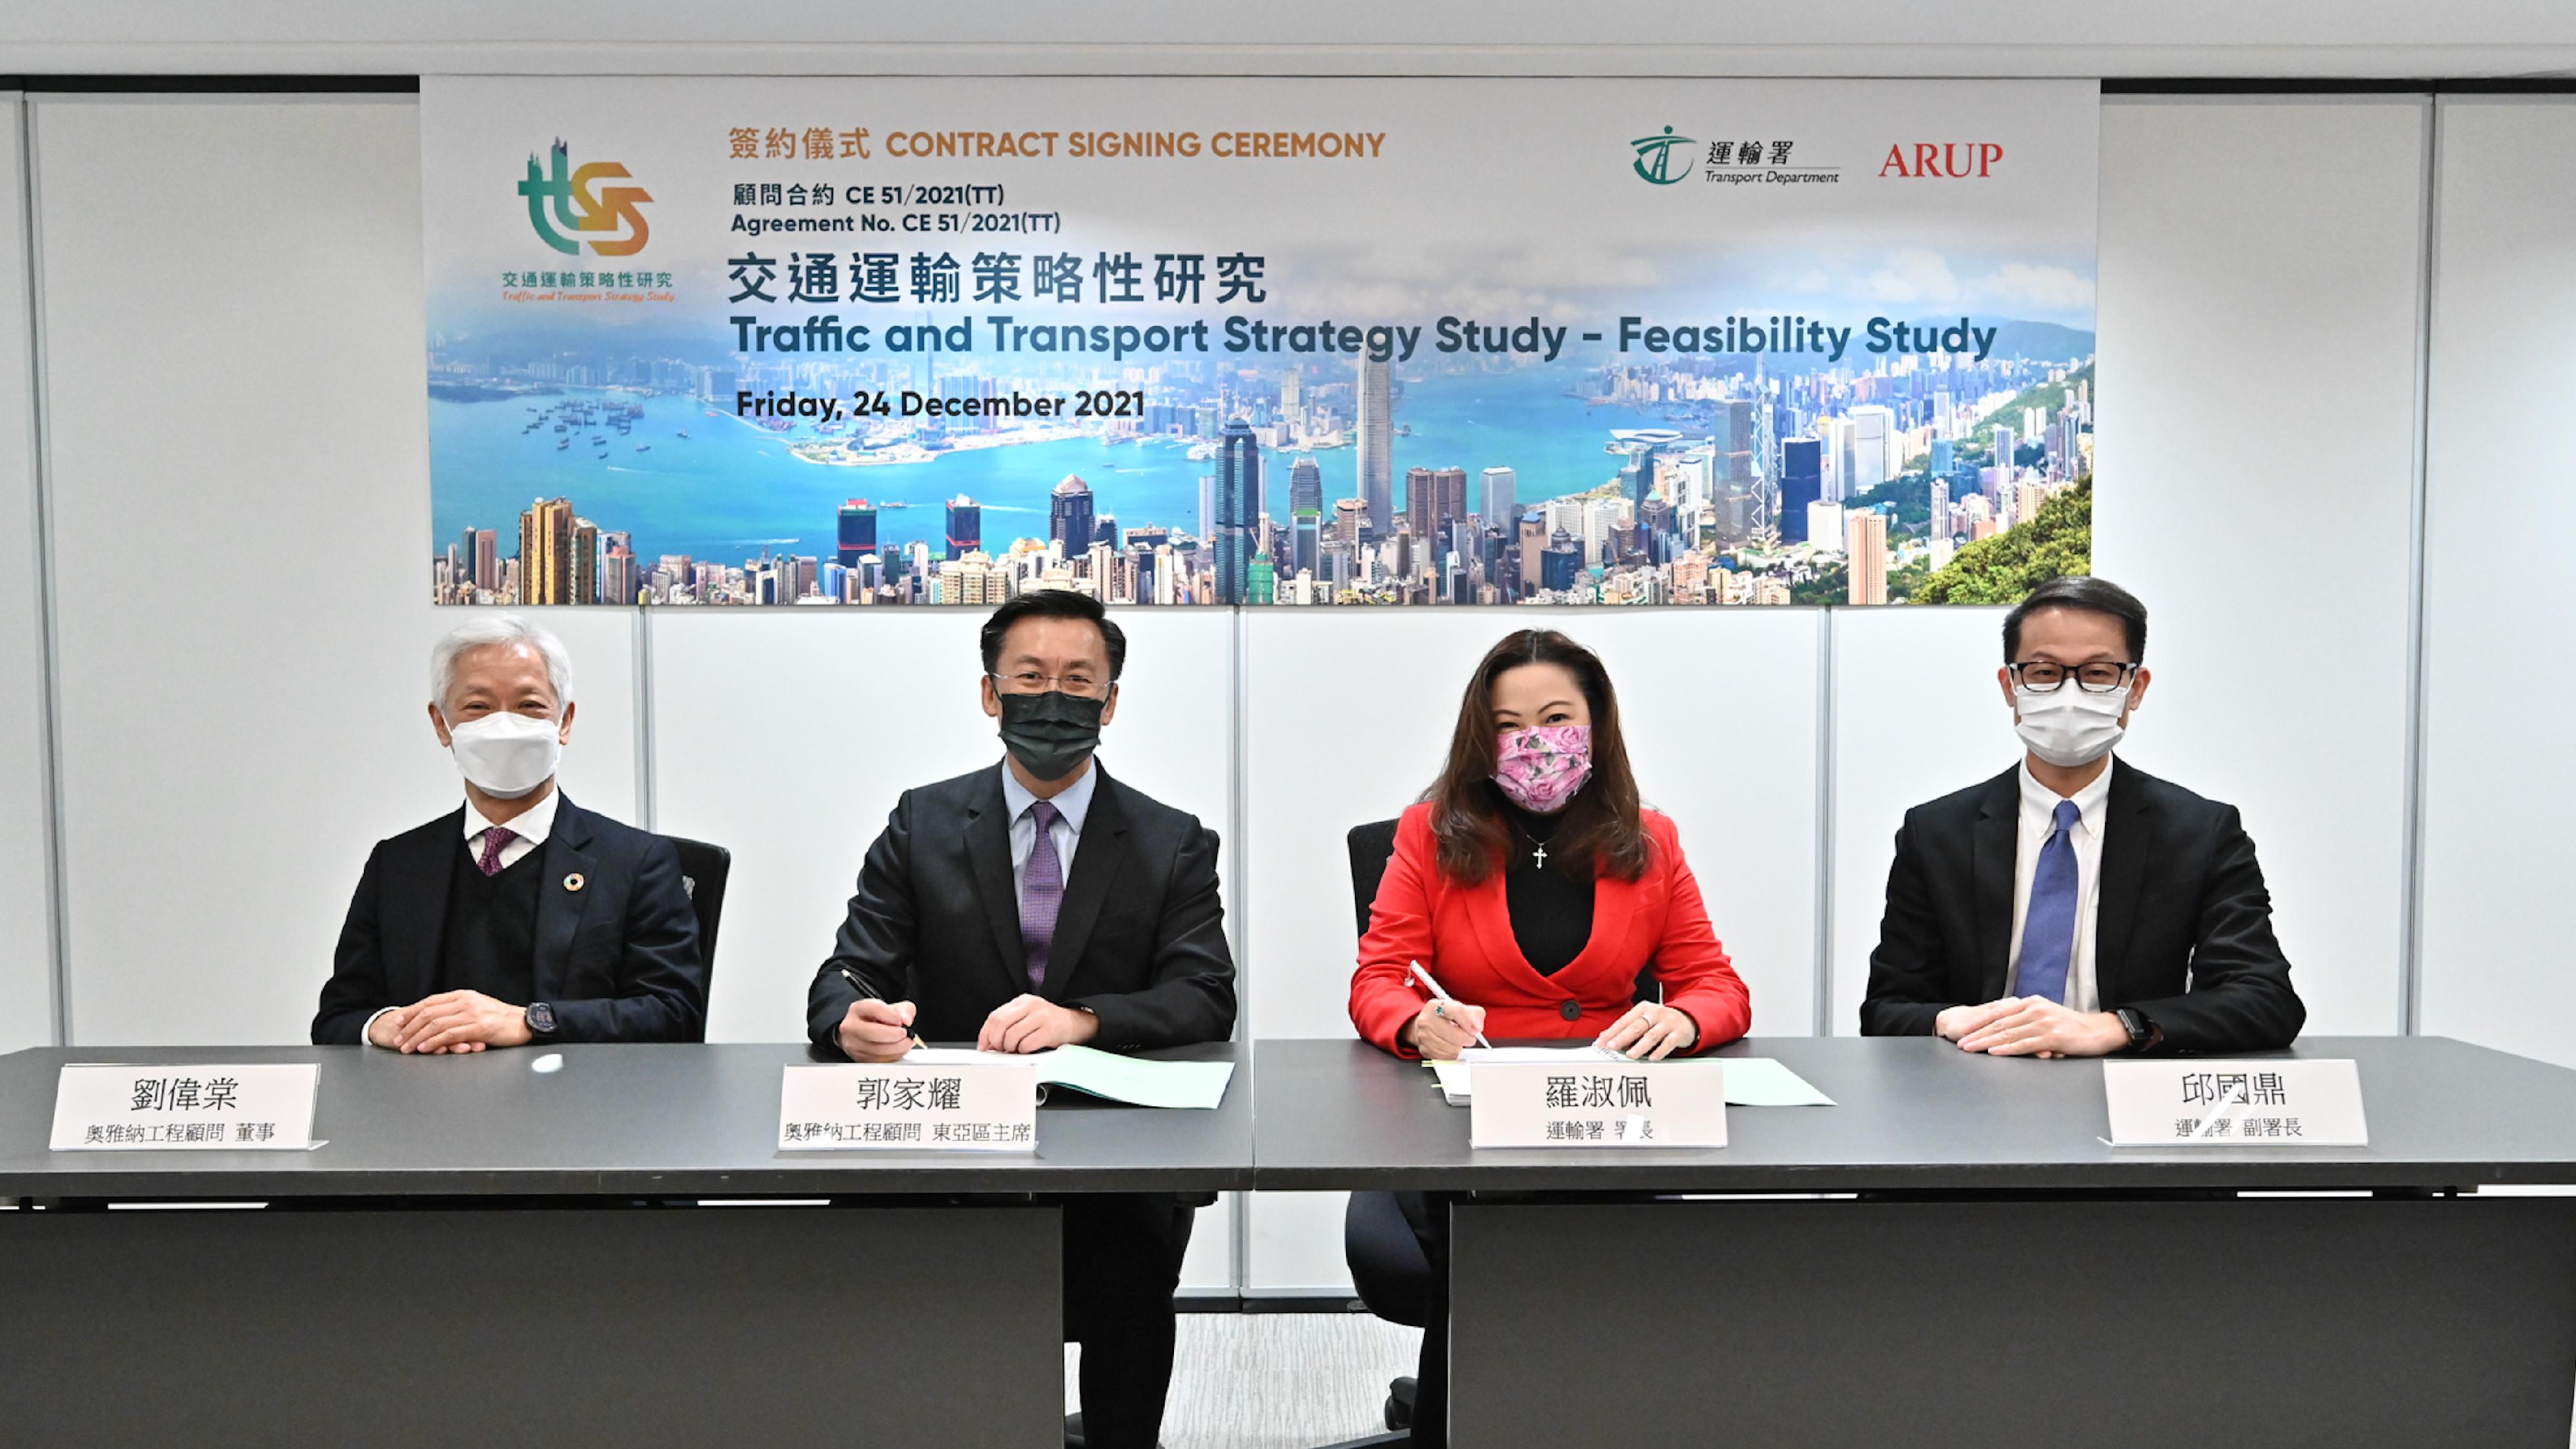 The Transport Department today (December 24) awarded a consultancy agreement for the Traffic and Transport Strategy Study to Ove Arup & Partners Hong Kong Ltd (Arup). Photo shows the Commissioner for Transport, Miss Rosanna Law (second right); the Deputy Commissioner for Transport (Planning and Technical Services), Mr Tony Yau (first right); the Chairman of East Asia Region of Arup, Mr Michael Kwok (second left); and the Director of Arup, Mr Wilfred Lau (first left), at the agreement signing ceremony.